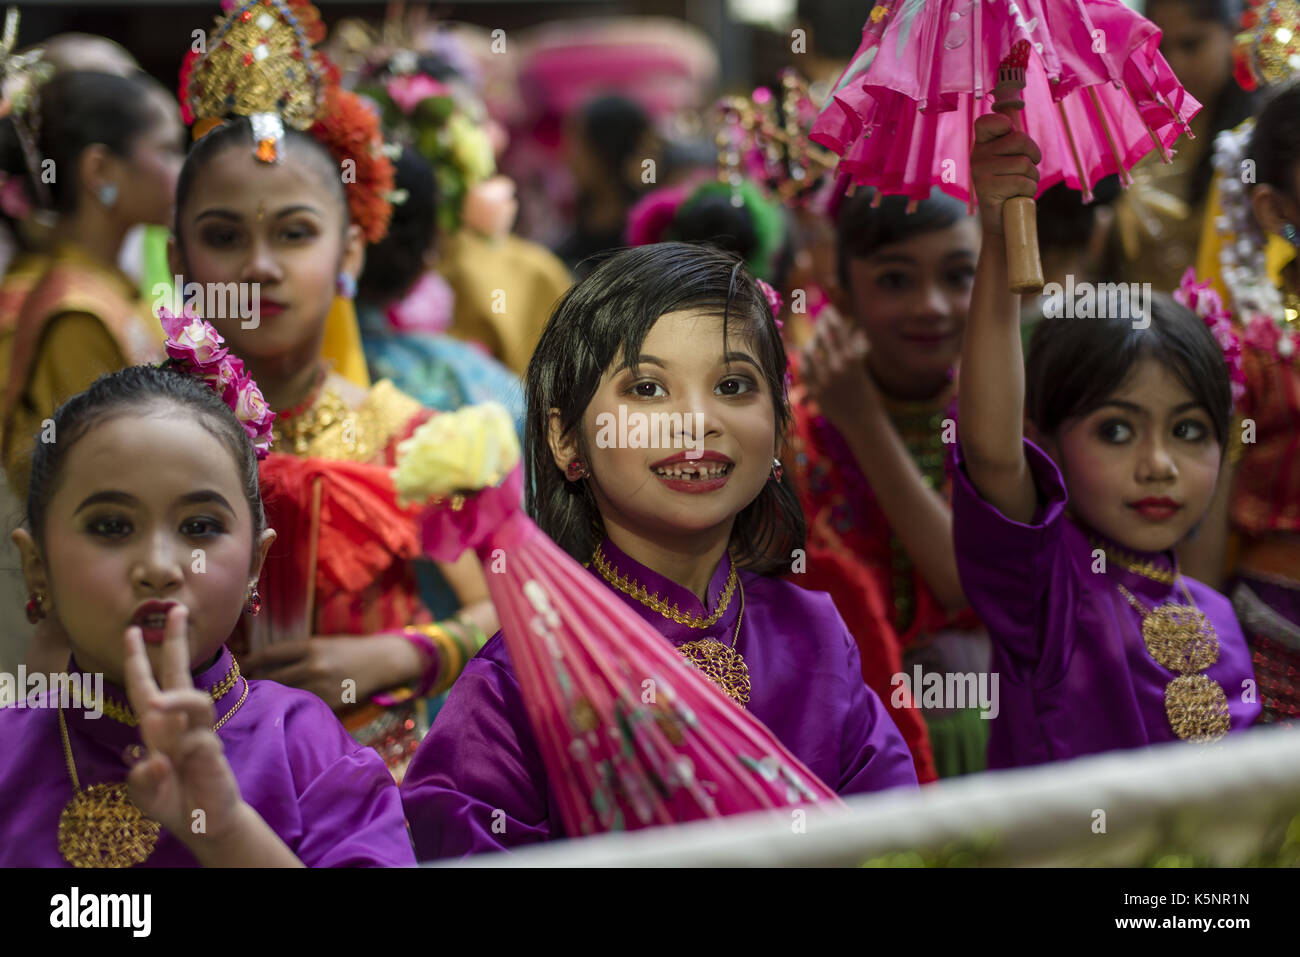 Kuala Lumpur, MALAYSIA. 10th Sep, 2017. Malaysian kids wearing traditional costumes during the Japanese annual 'Bon Odori' festival celebrations in Kuala Lumpur, Malaysia on September 10, 2017. Hundreds of participants including both resident Japanese nationals and local Malaysians are celebrated the summer dance festival. Credit: Chris Jung/ZUMA Wire/Alamy Live News Stock Photo